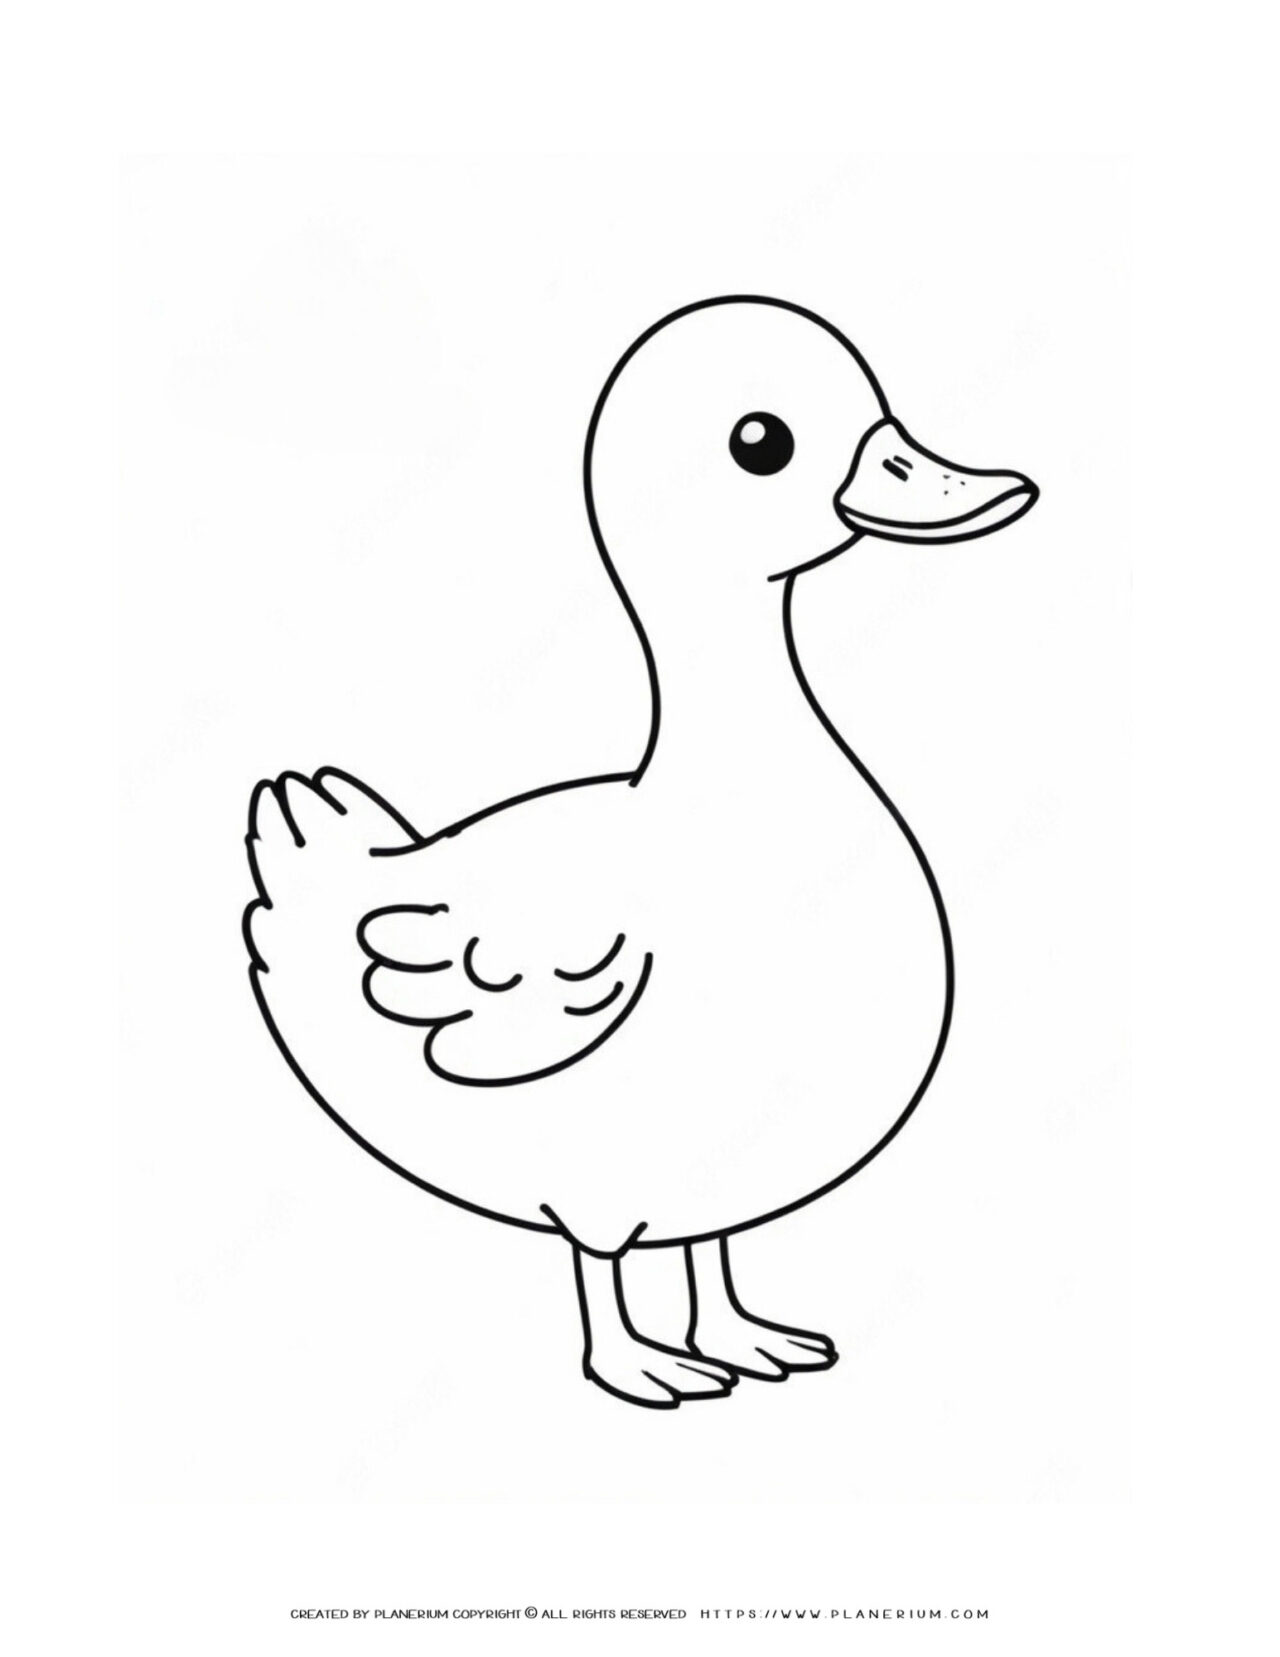 Big-Duck-Outline-Facing-to-the-Right-Simple-Coloring-Page-for-Kids